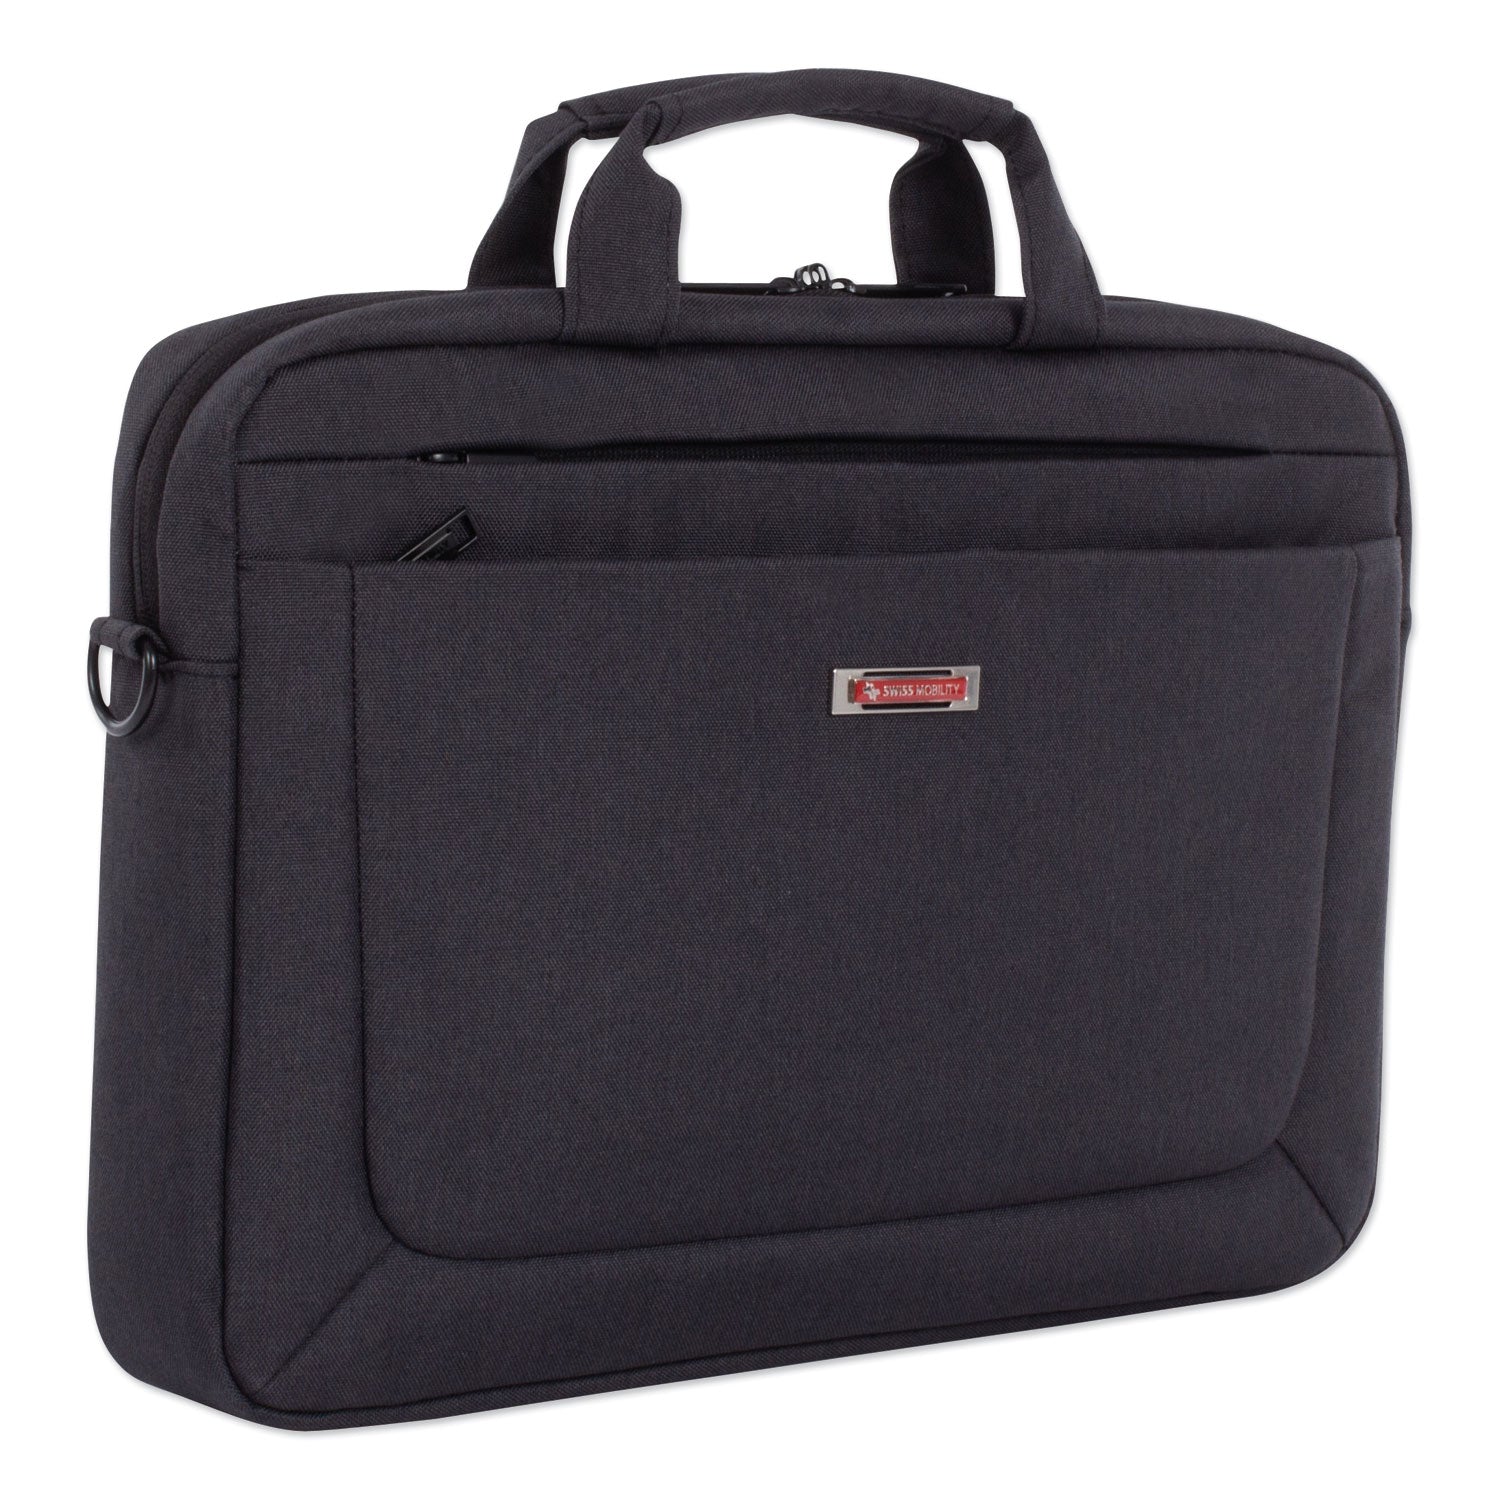 cadence-slim-briefcase-fits-devices-up-to-156-polyester-35-x-35-x-16-charcoal_swzexb1010smch - 1